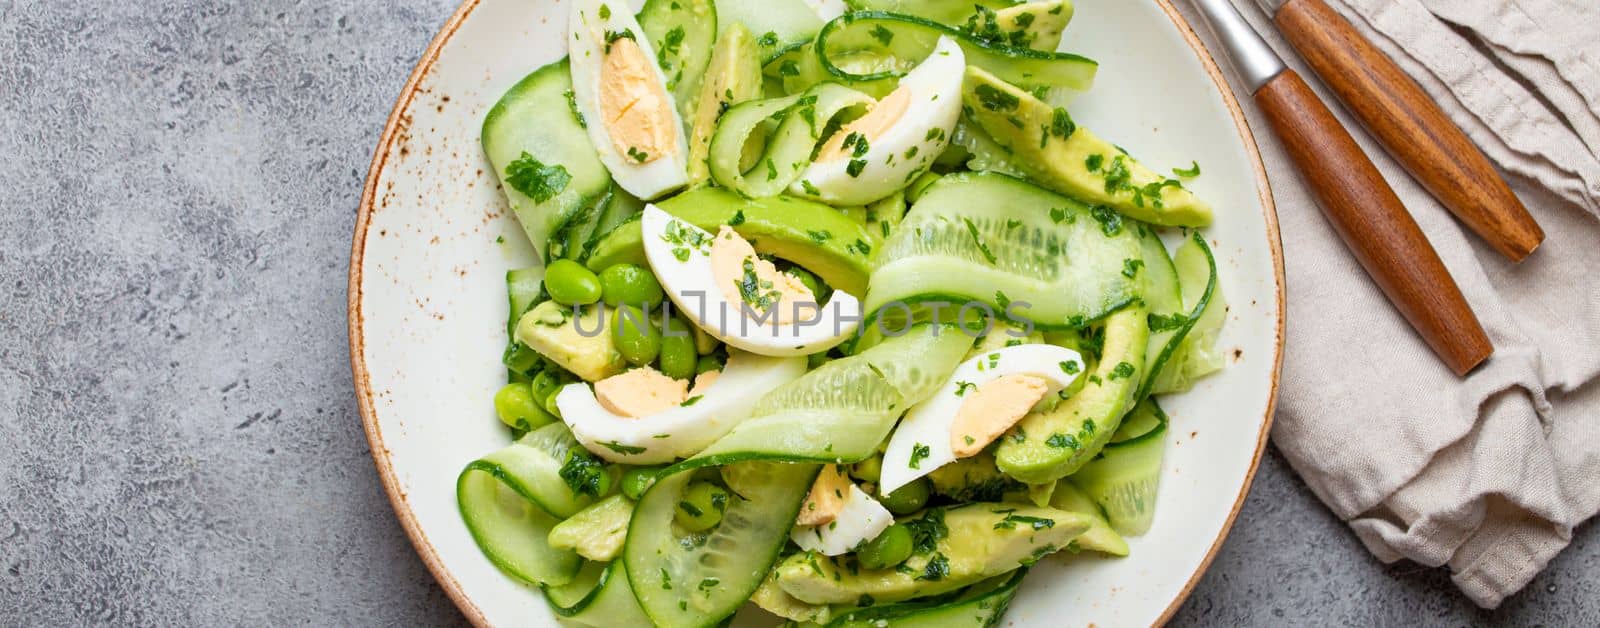 Healthy green avocado salad bowl with boiled eggs, sliced cucumbers, edamame beans, olive oil and herbs on ceramic plate top view, grey stone rustic table background by its_al_dente